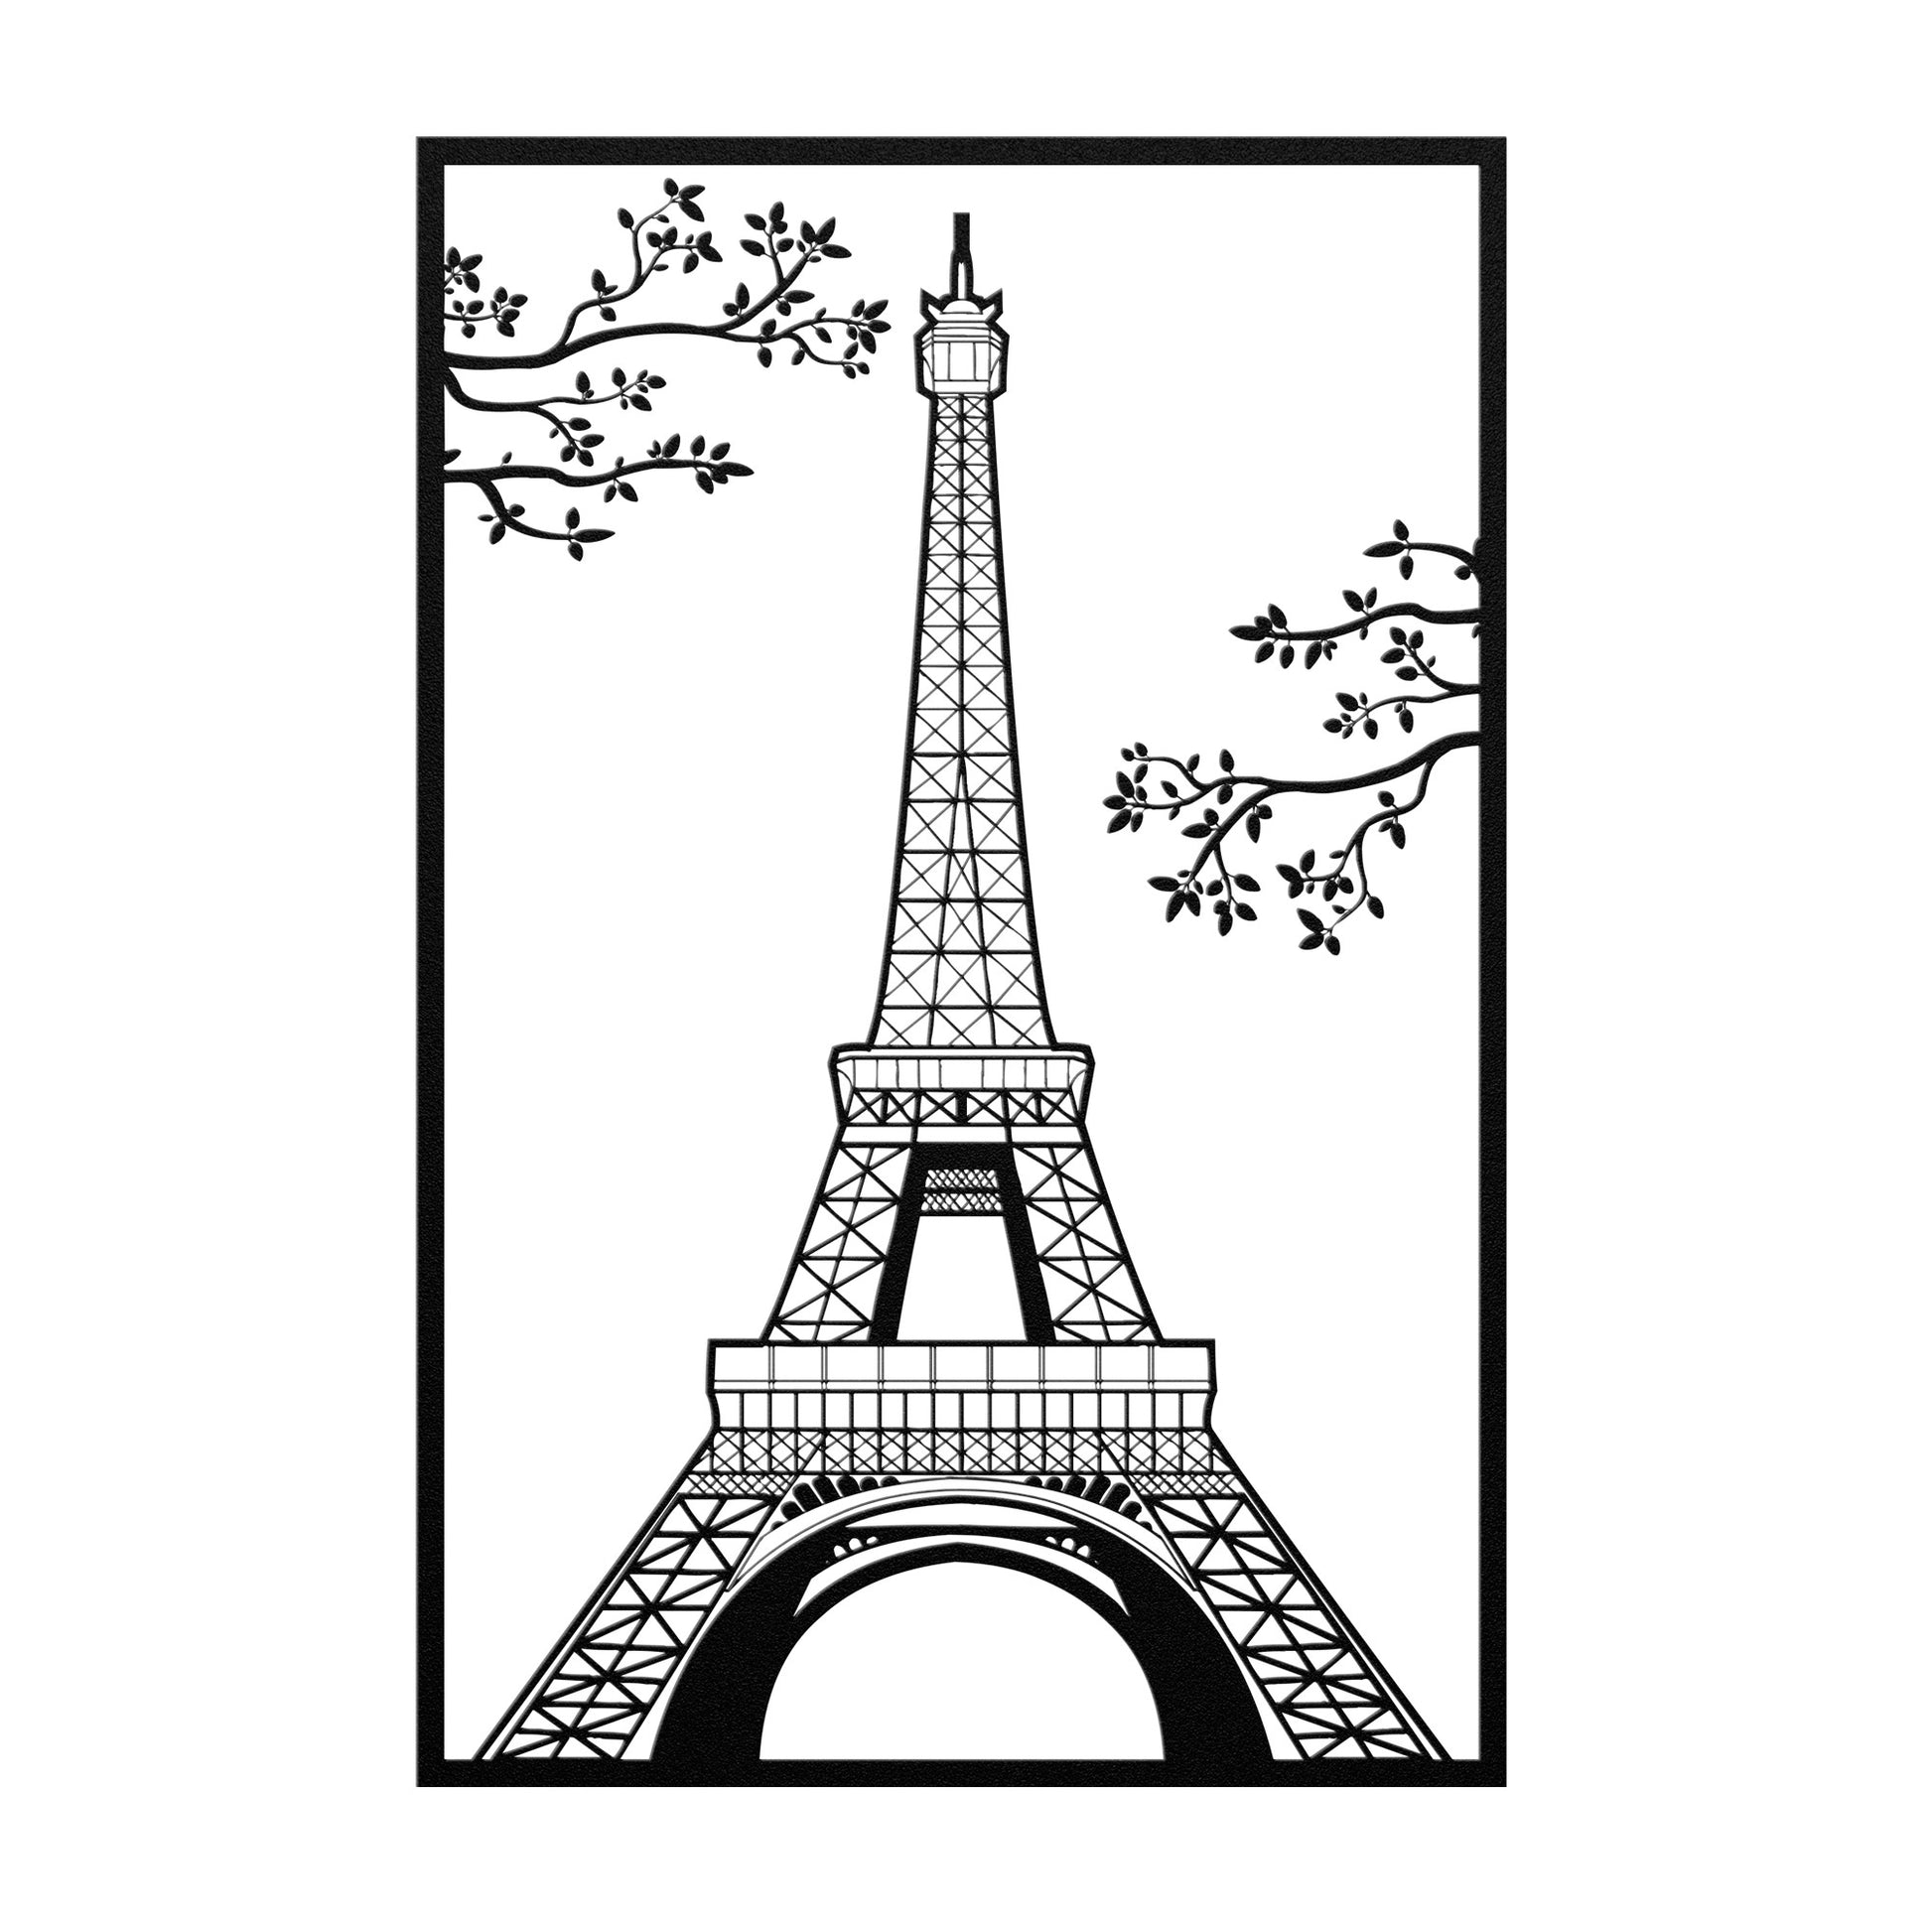 eiffel tower at night black and white drawing